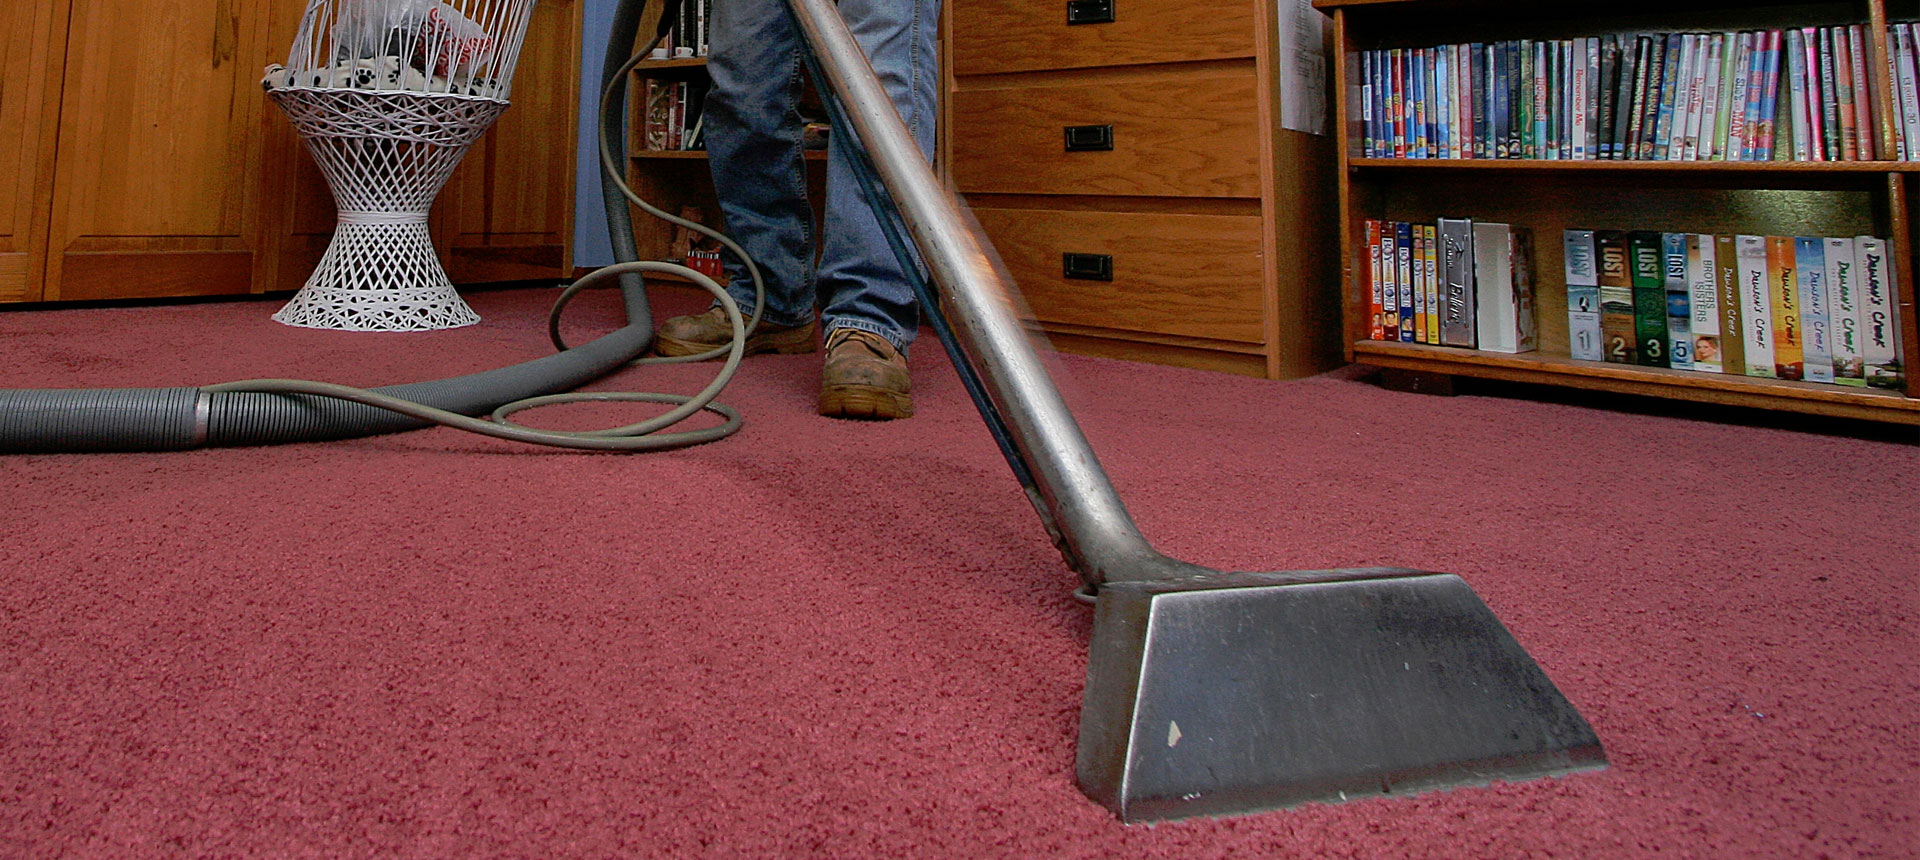 Carpet Cleaning Services Maryland